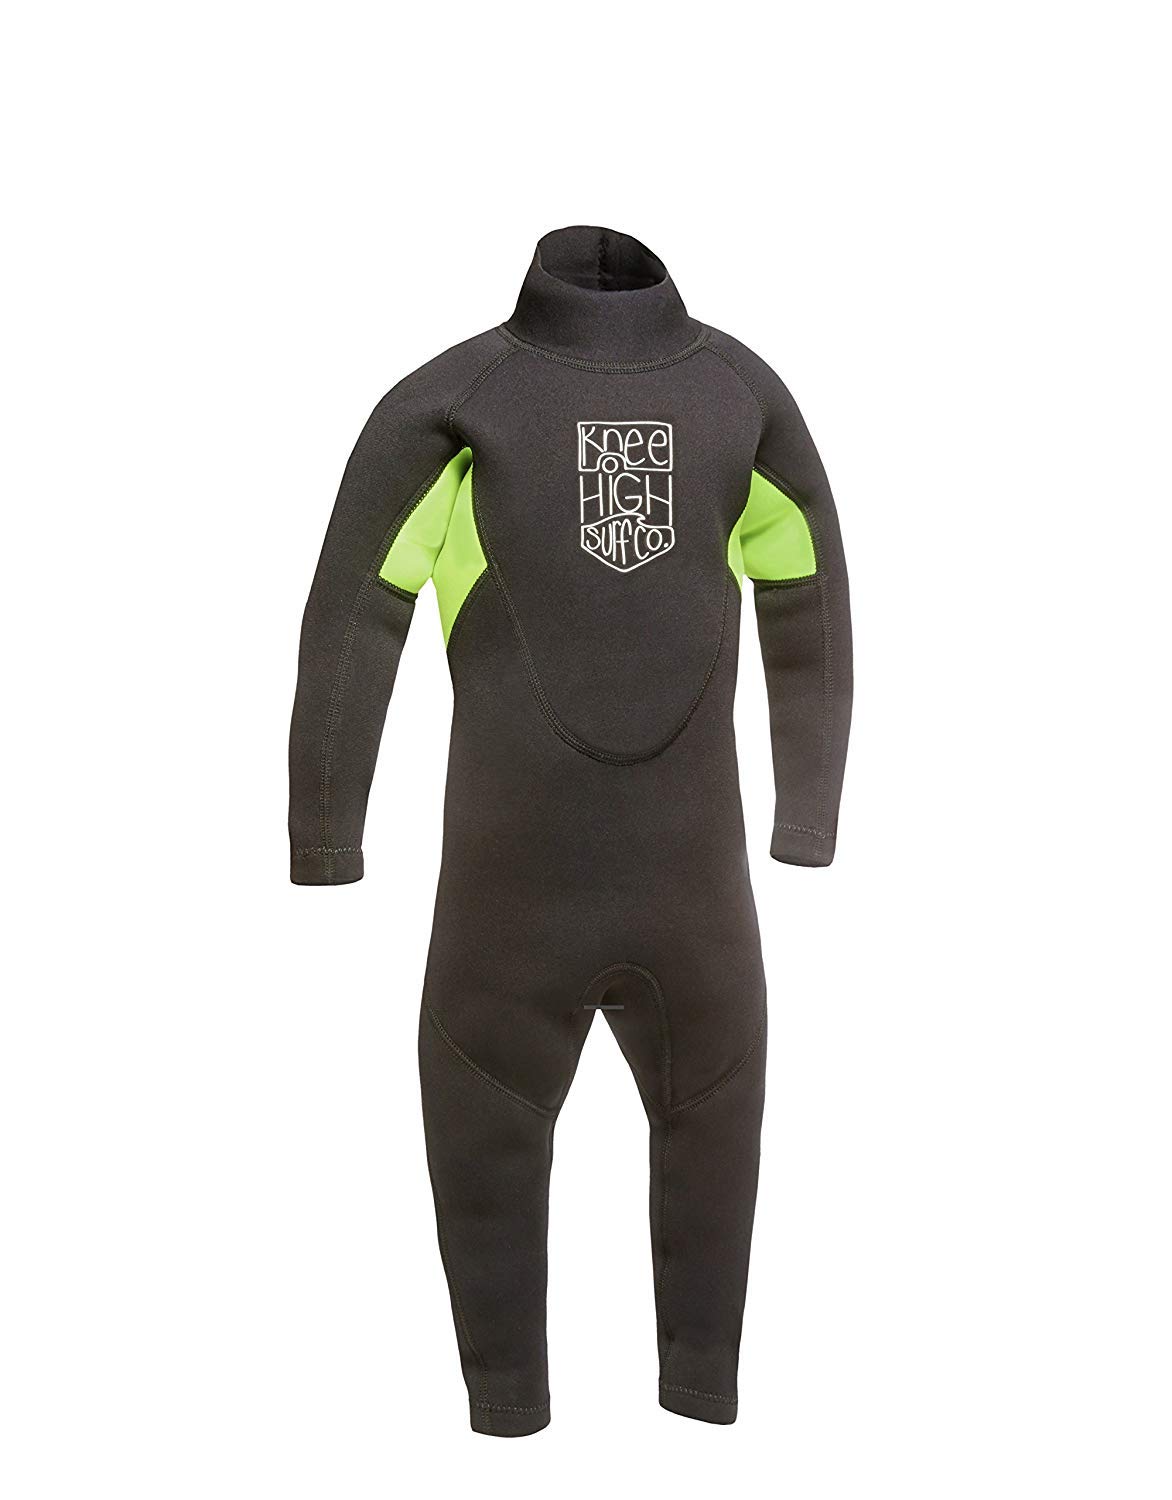 Knee High Surf Co. Kids Wetsuit Full Suit for Infant Toddler and Baby